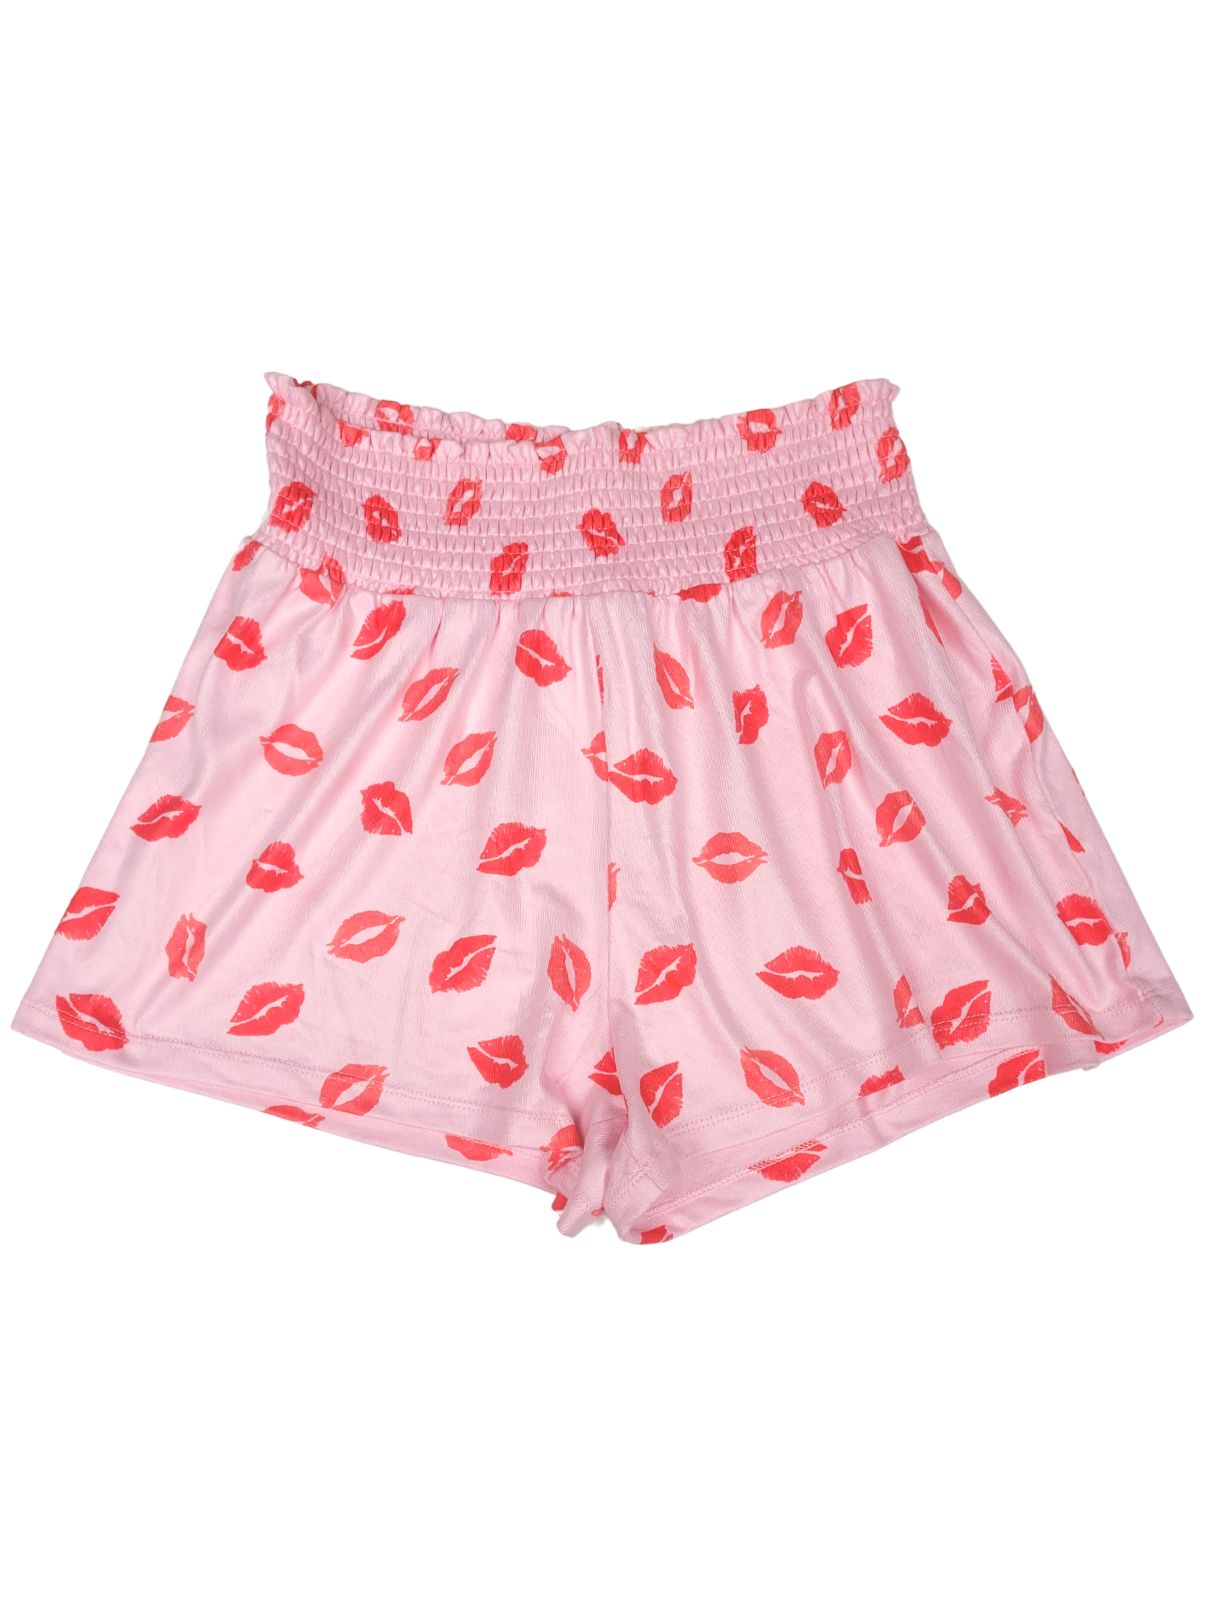 Z Supply Dawn Kisses in Cotton Candy | Cotton Island Women's Clothing ...